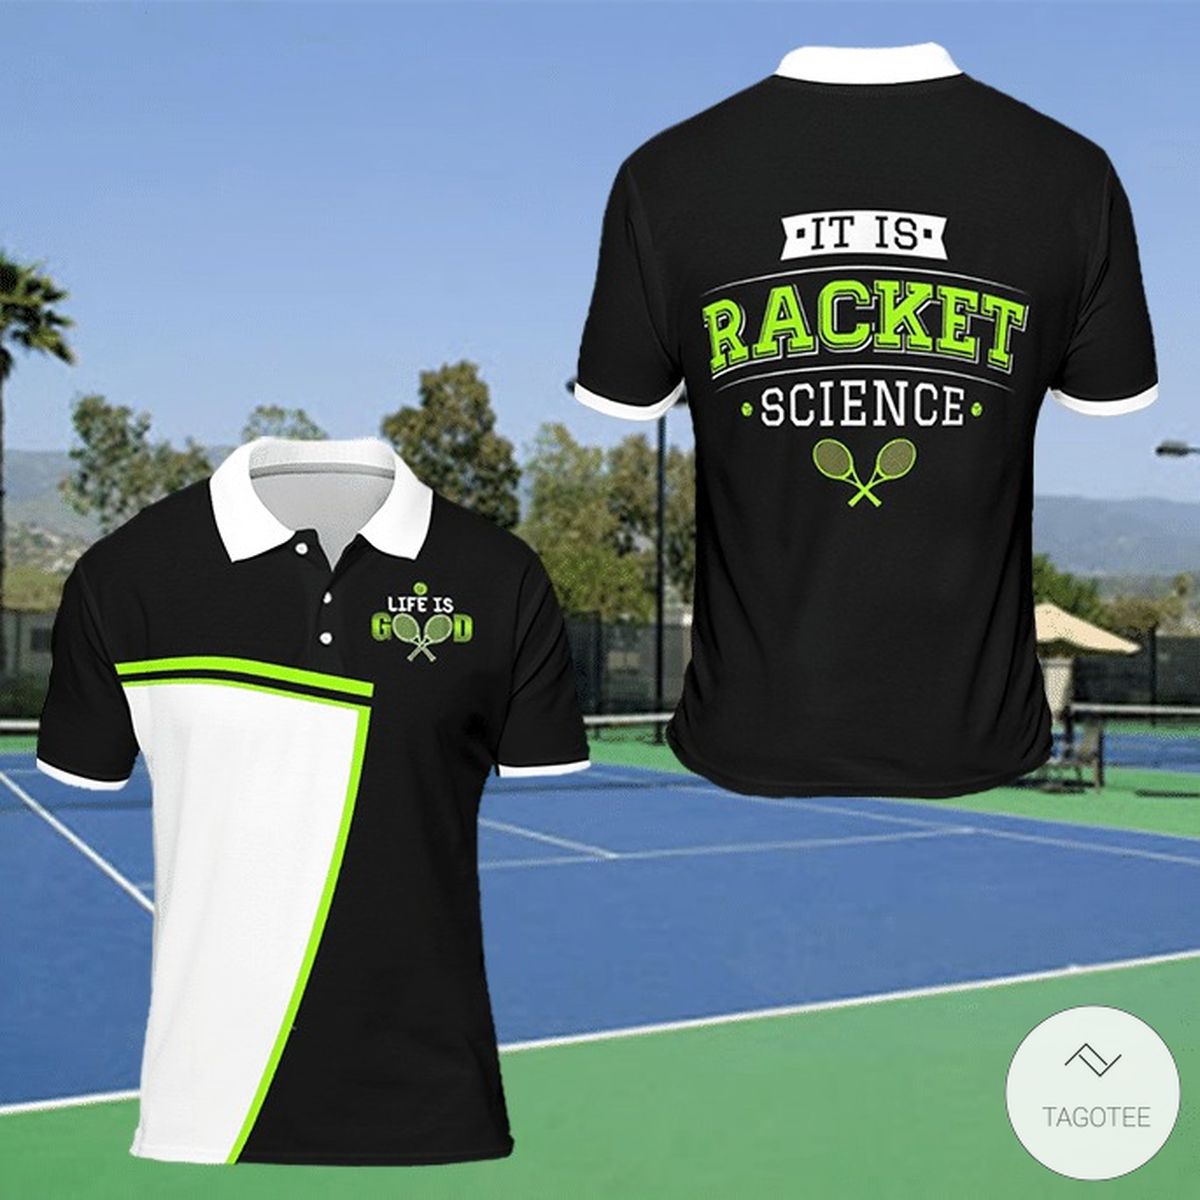 Tennis-It-Is-Racket-Science-Polo-Shirt